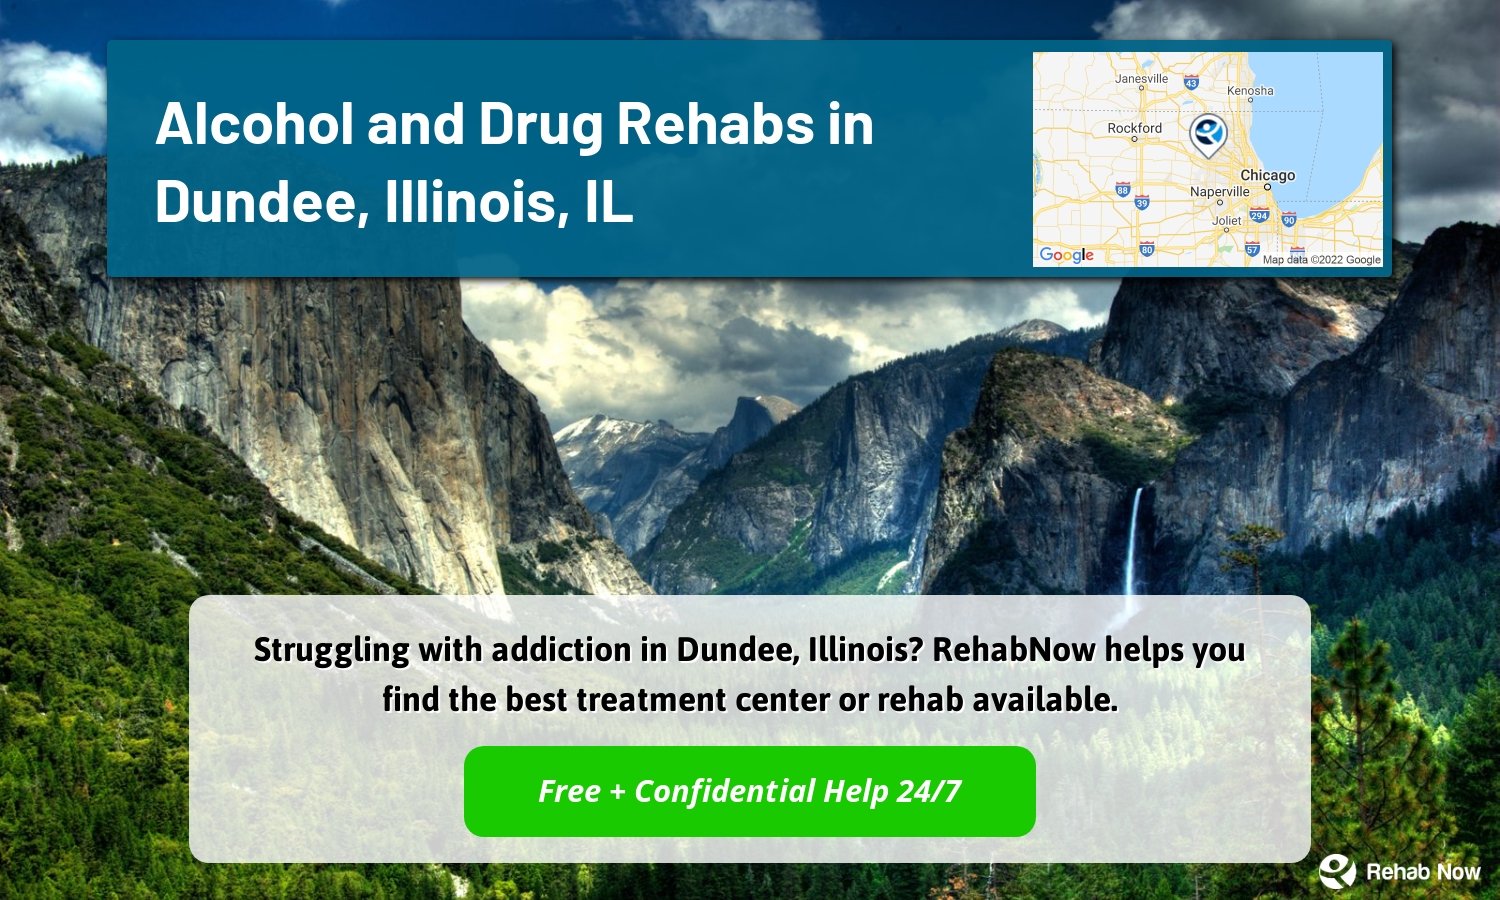 Struggling with addiction in Dundee, Illinois? RehabNow helps you find the best treatment center or rehab available.